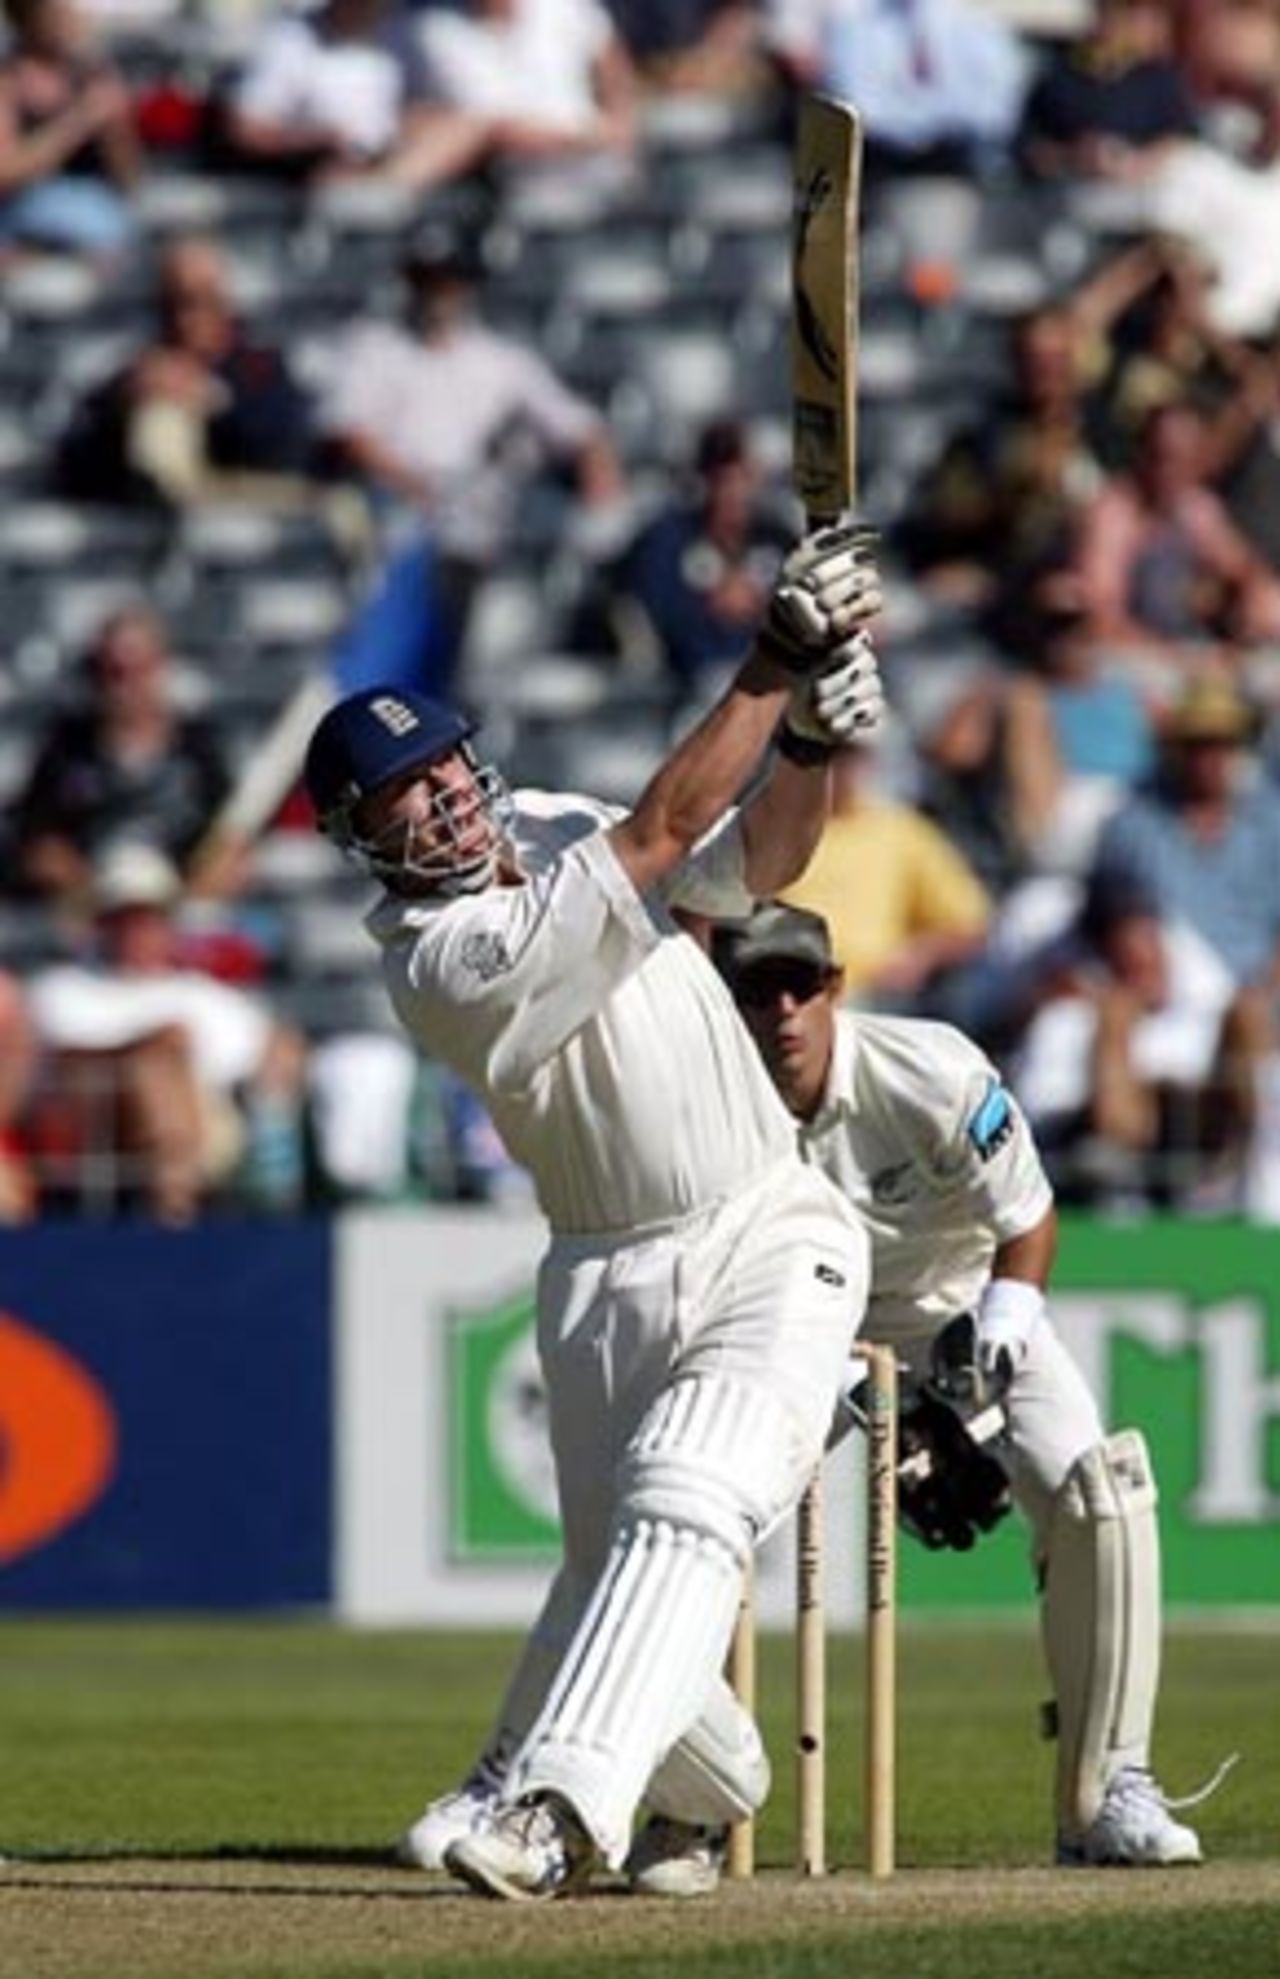 England batsman Andrew Flintoff lofts a six over midwicket from New Zealand bowler Daniel Vettori during his second innings of 137. 1st Test: New Zealand v England at Jade Stadium, Christchurch, 13-17 March 2002 (15 March 2002).